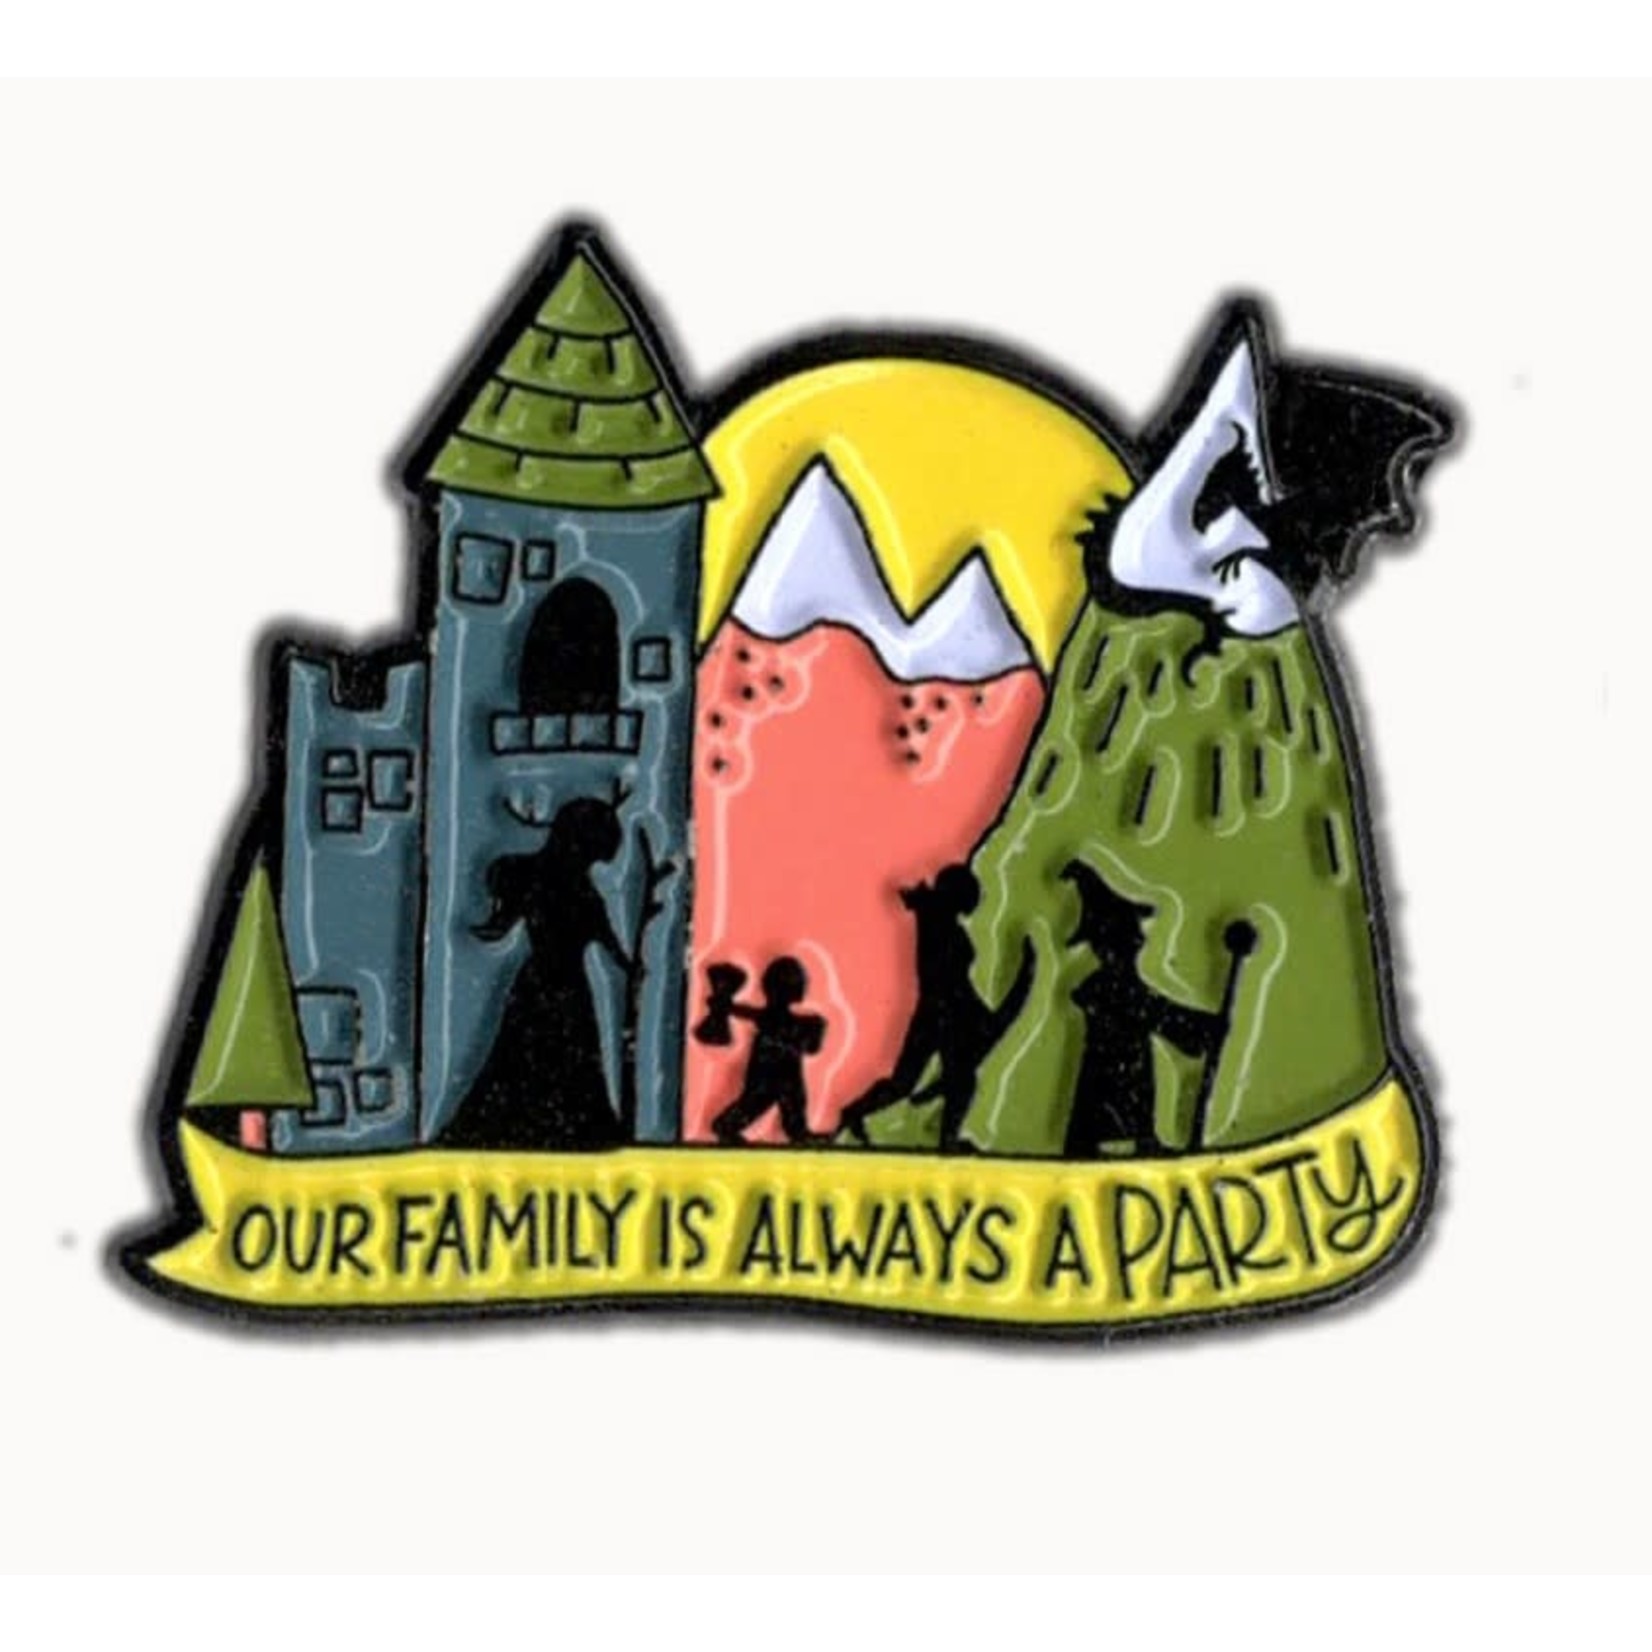 Storymakers Trading Co Enamel Pin: Our Family is Always a Party